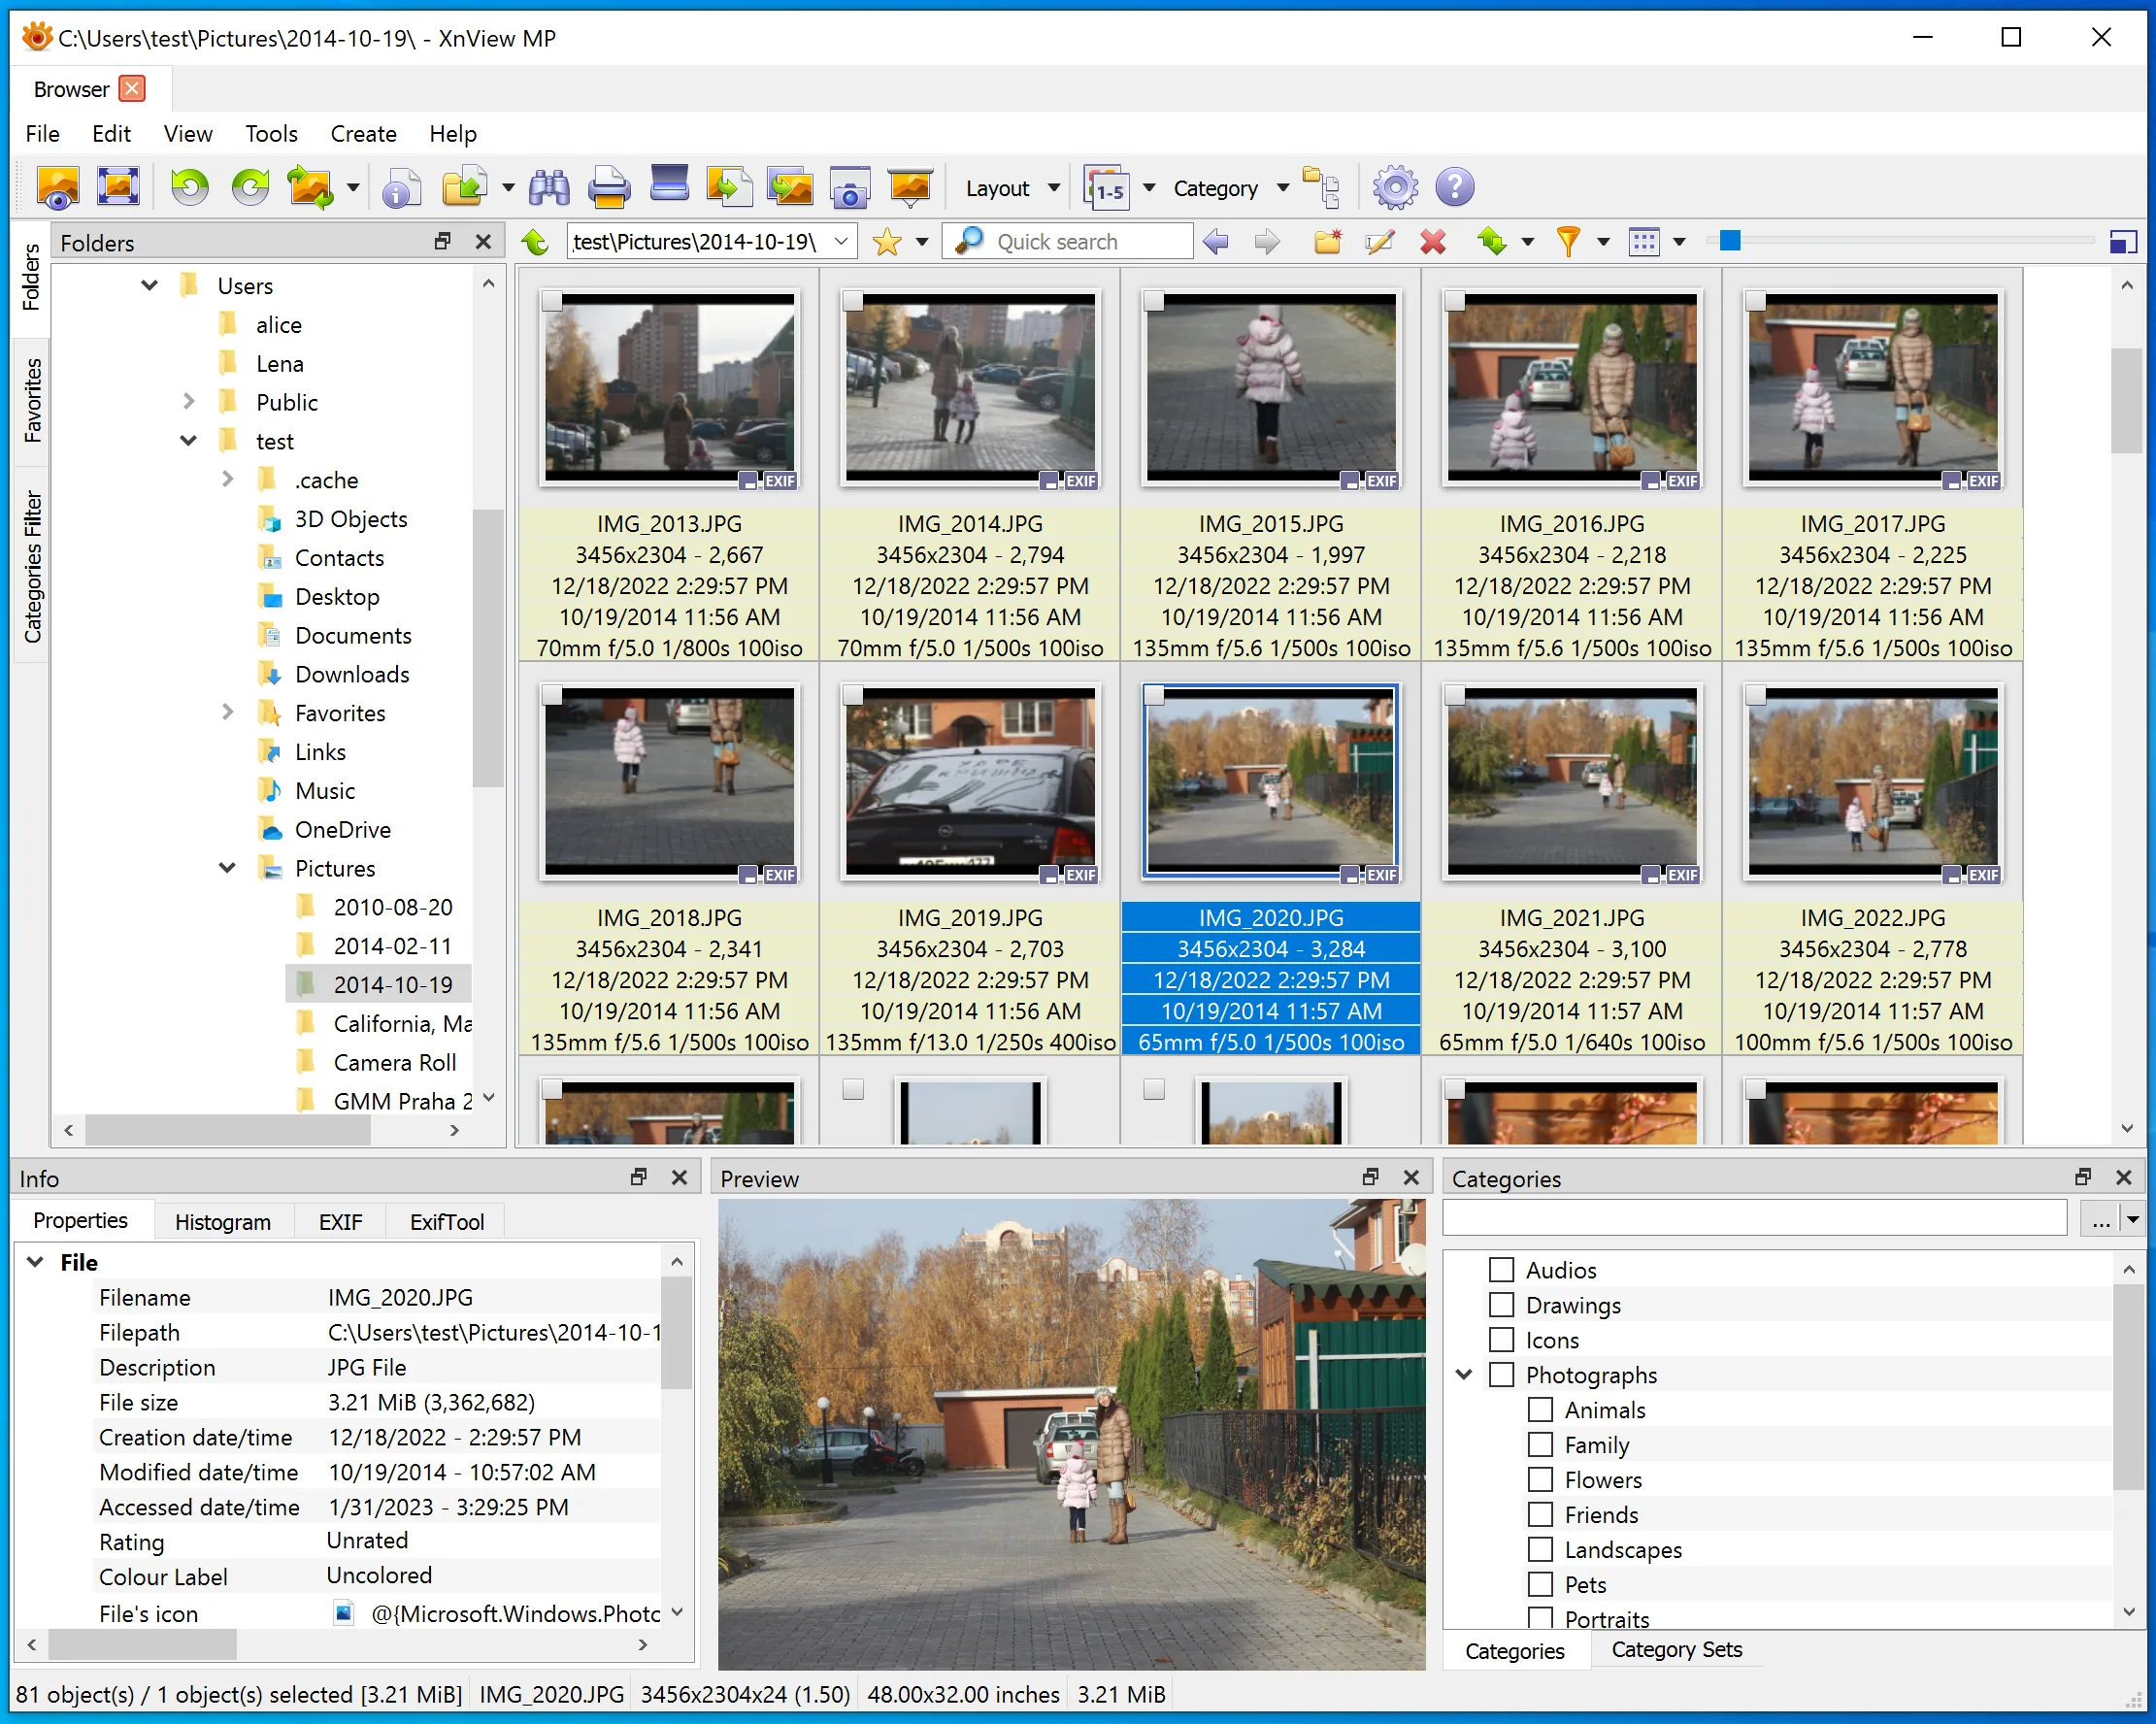 The XnView interface is overloaded with a large number of additional panels